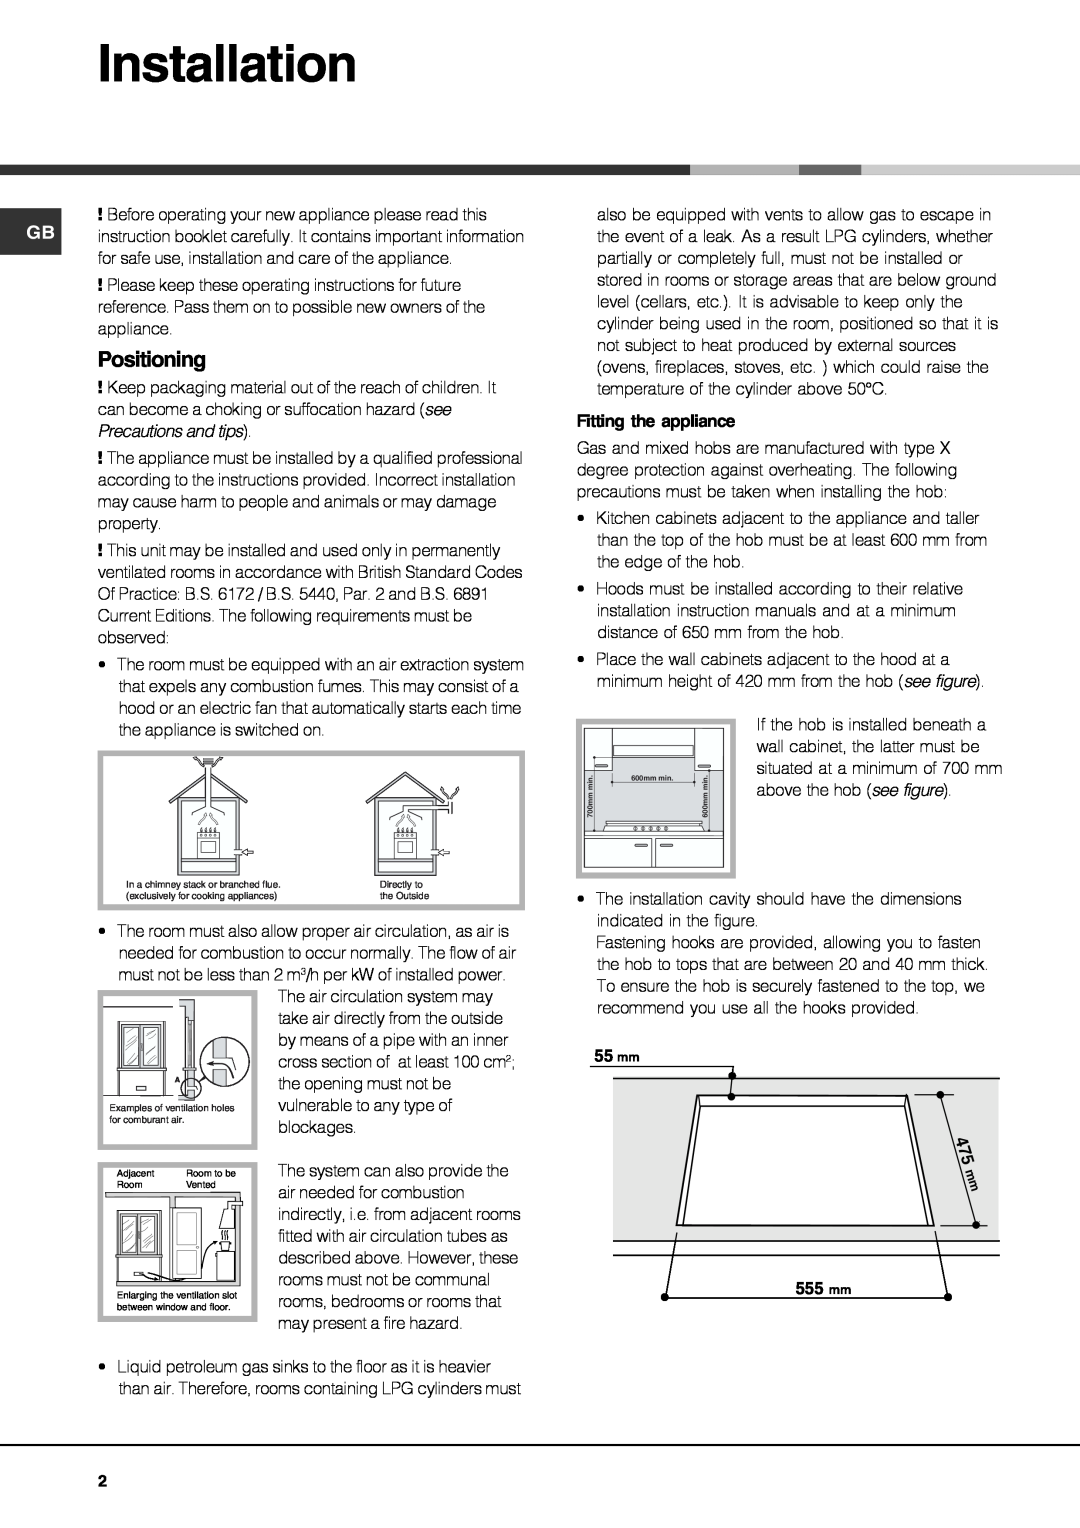 Hotpoint G750, G760 operating instructions Installation, Positioning, Fitting the appliance, 555 mm 